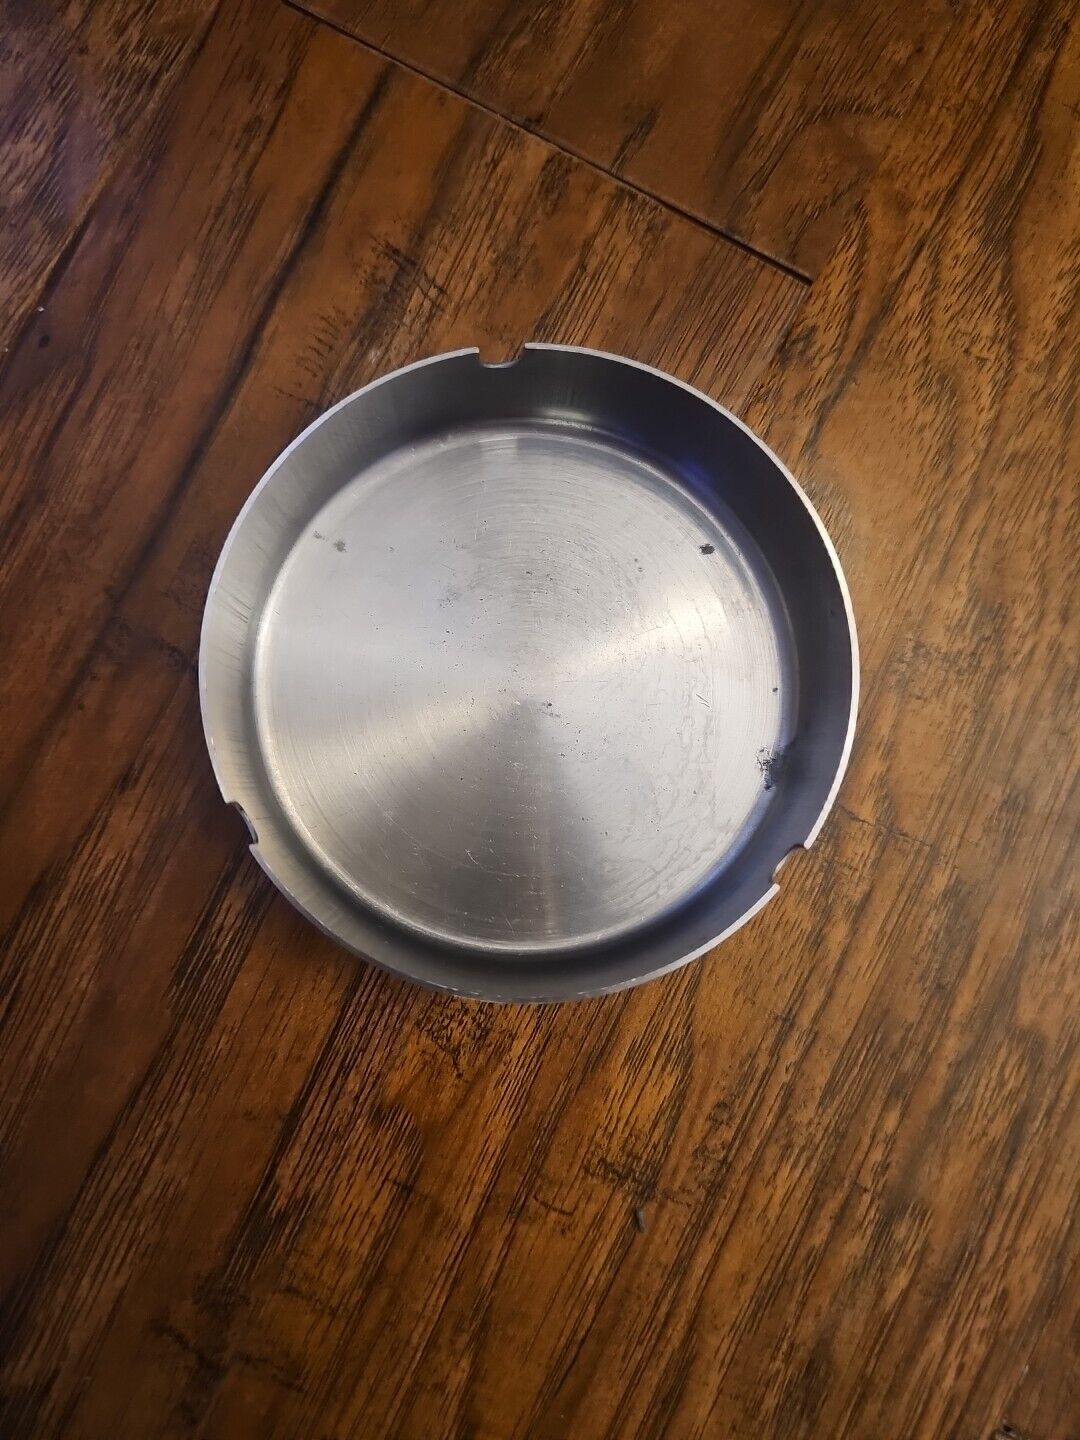 Stainless Steel Ashtray for Cigarettes, Indoor, Outdoor Ashtray, 4x4x1\